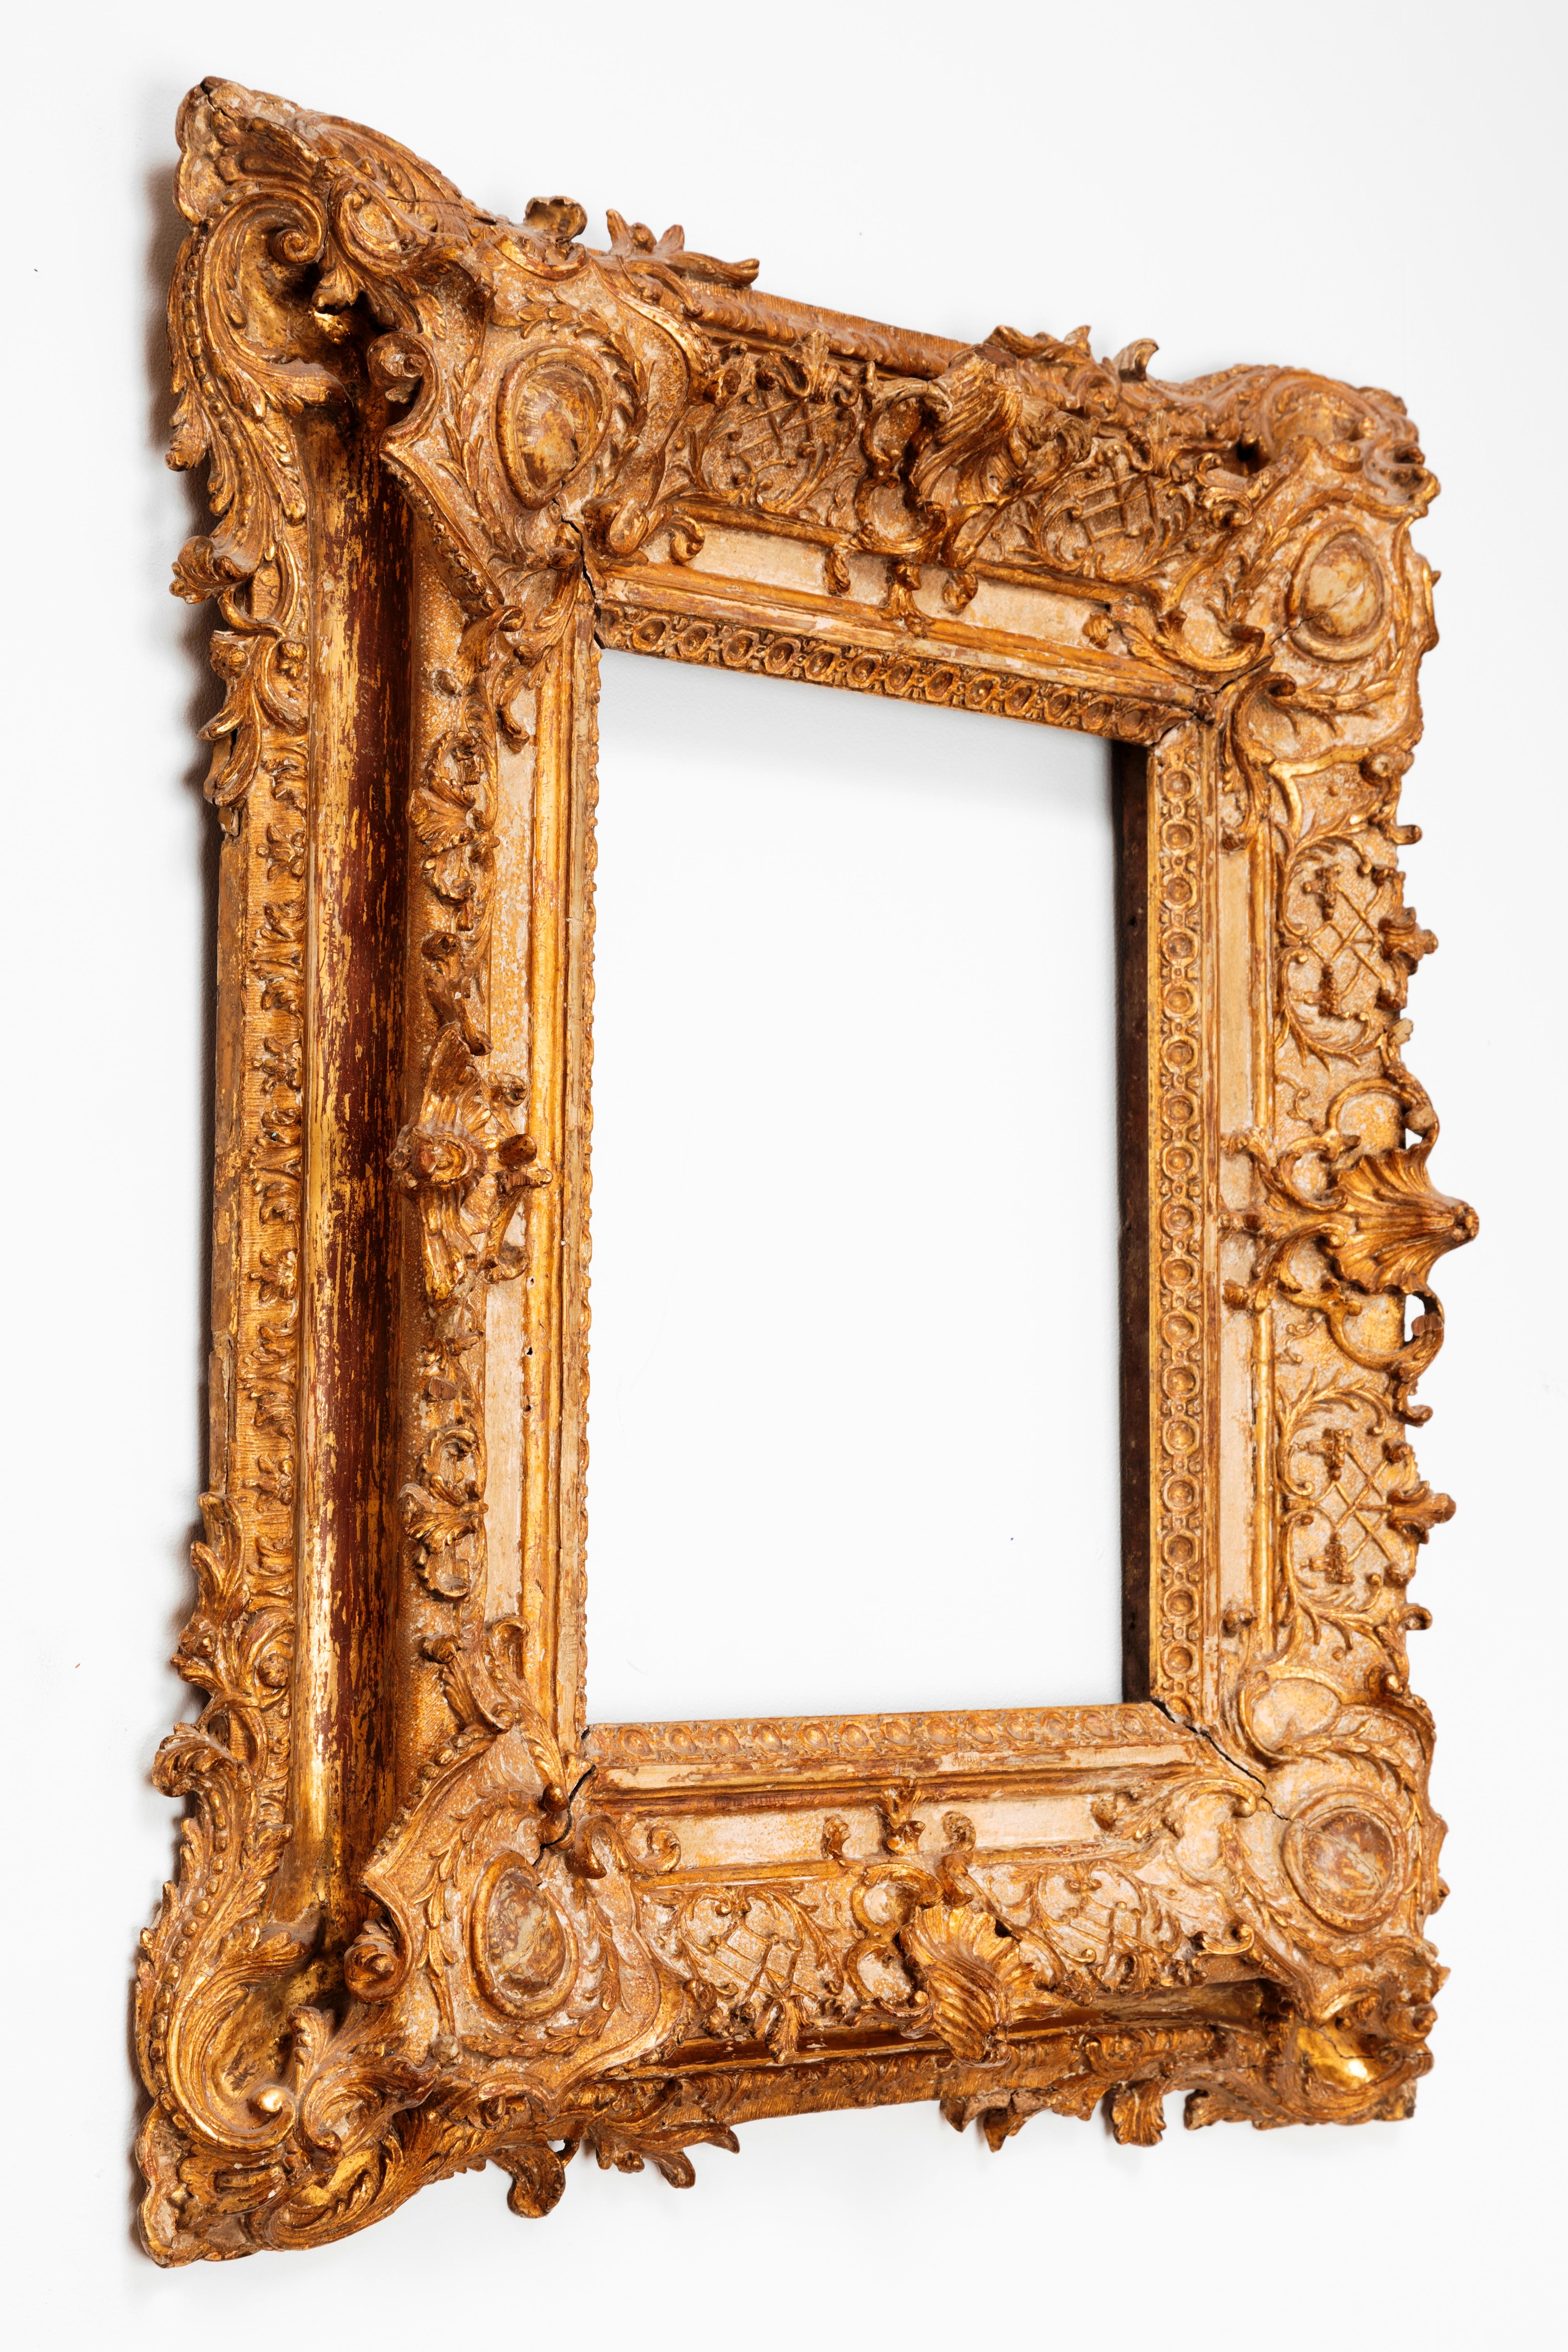 Exceptional Royal quality French Regence frame mounted as mirror, France, 1720s
carved giltwood
Some of the most extraordinary carving and gilding ever seen on a frame.
Illustrated in the catalogue of the exhibition 